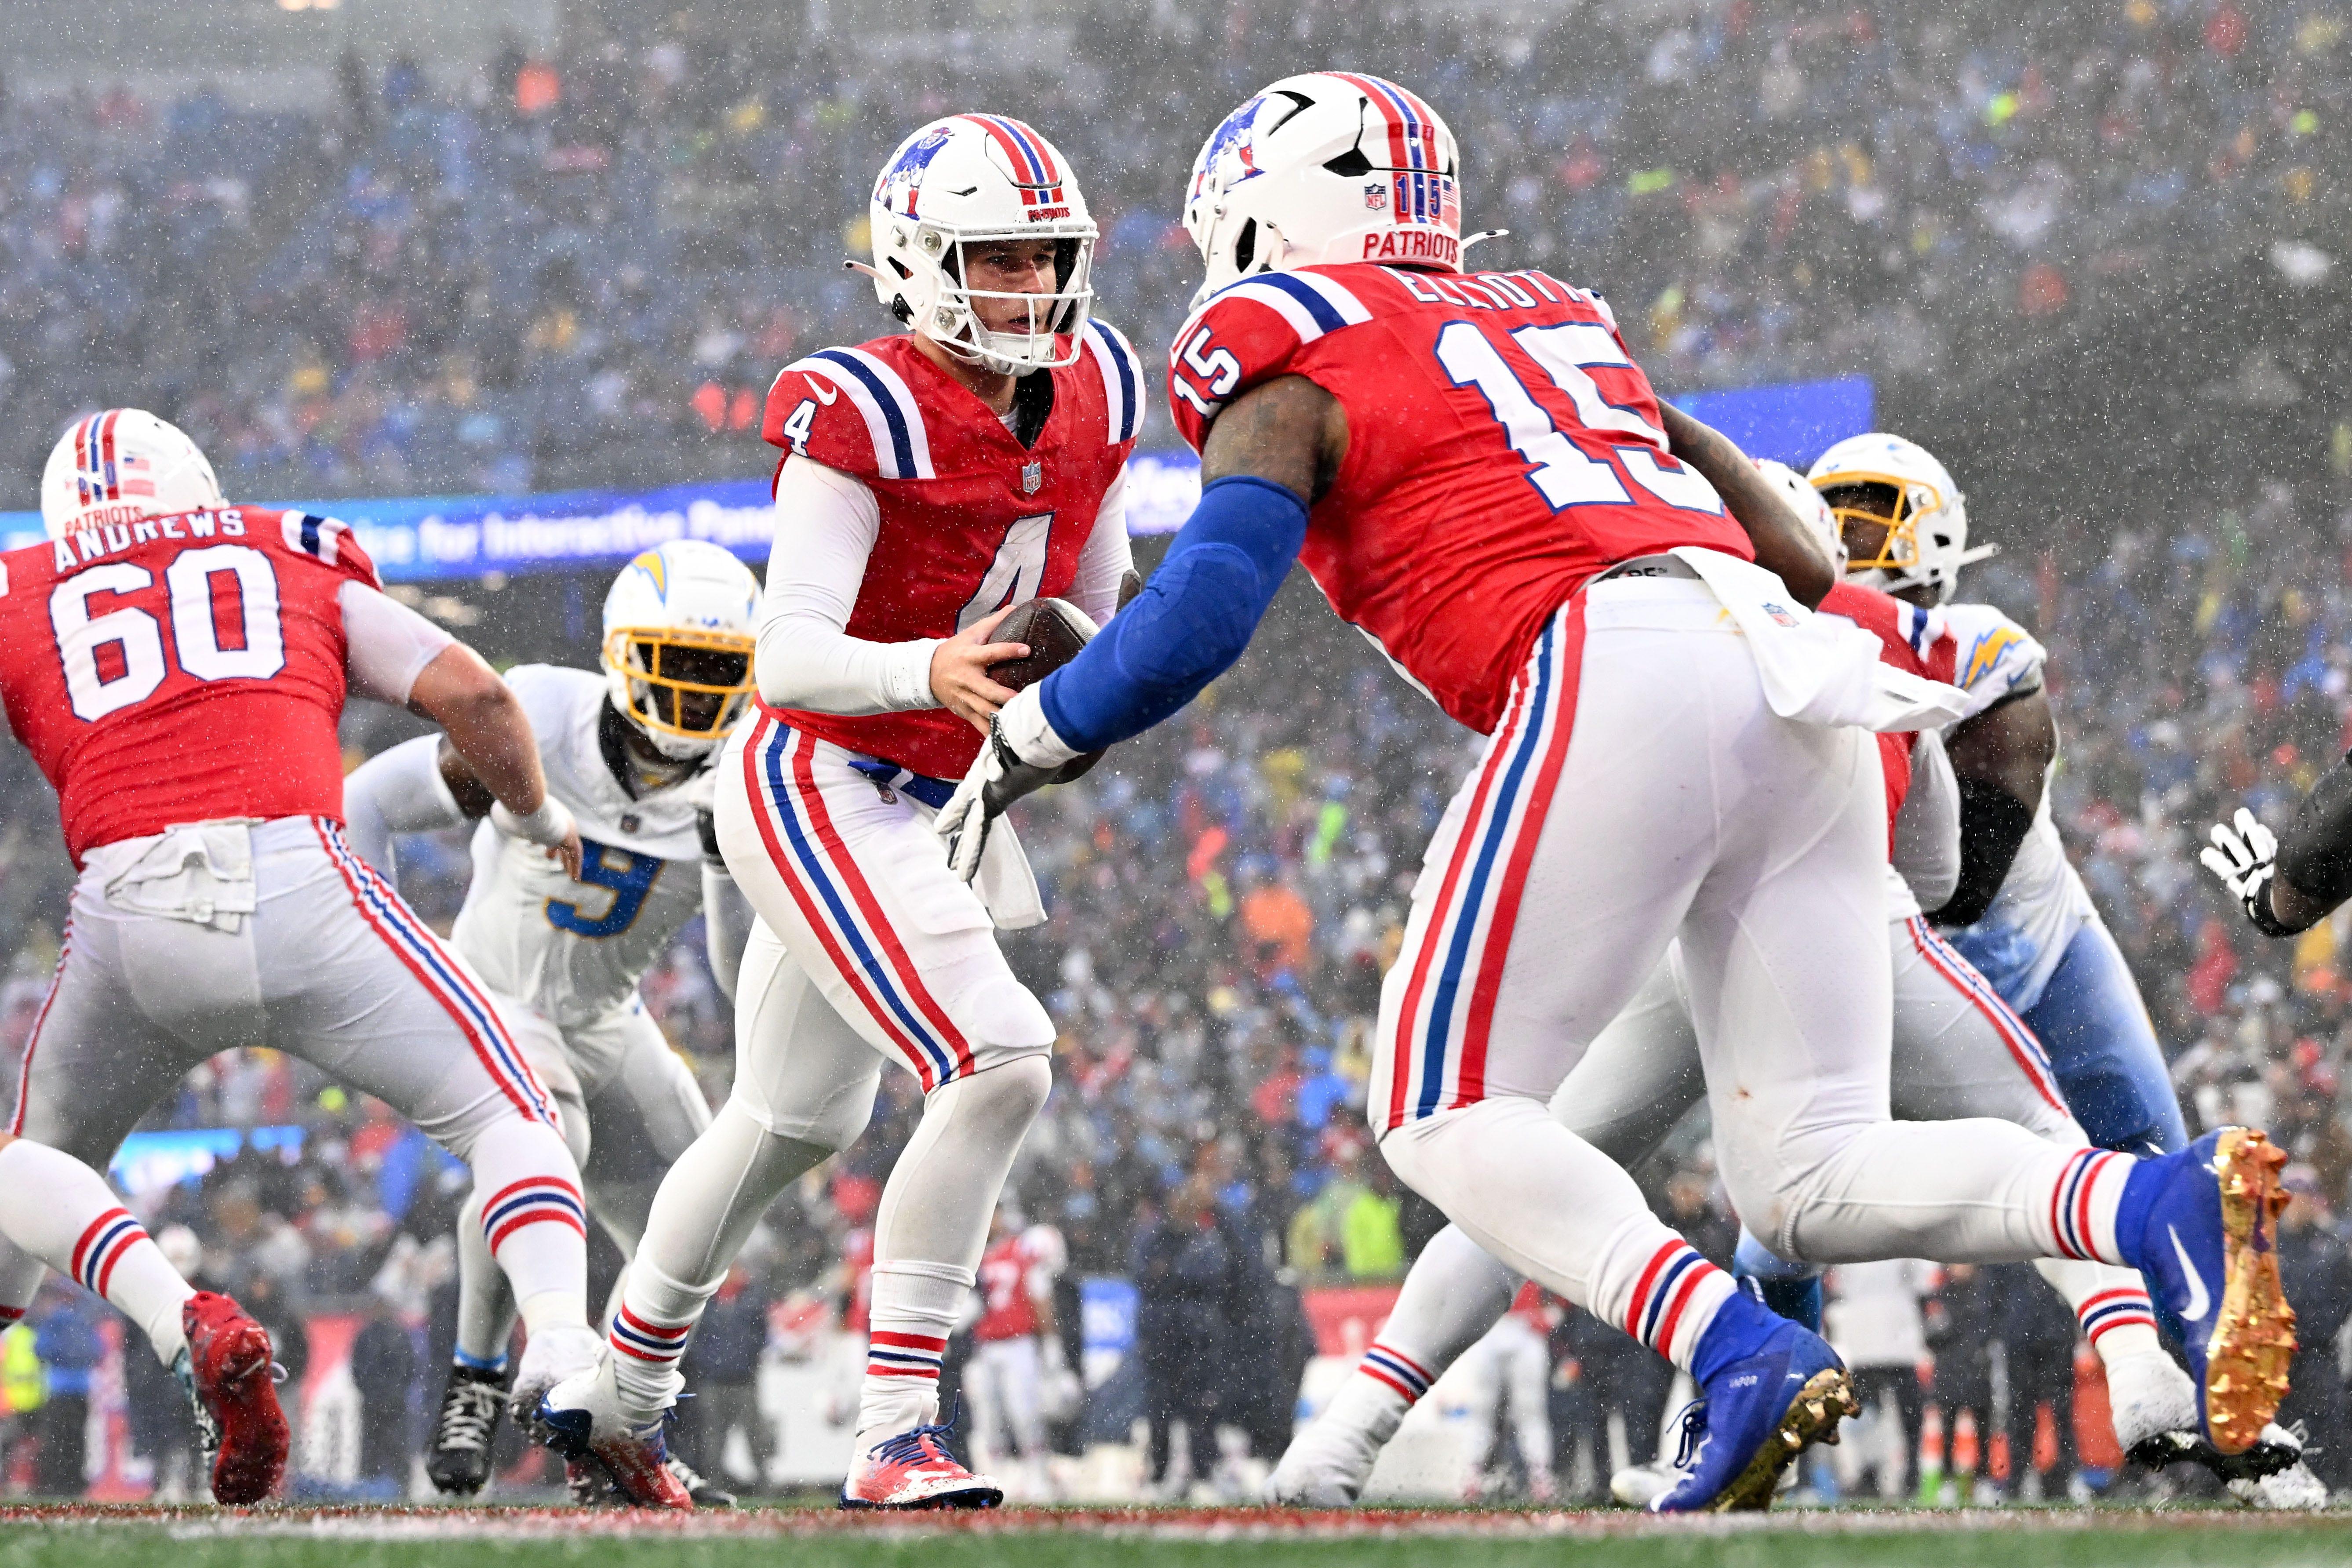 New England Patriots quarterback Bailey Zappe hands the ball off to running back Ezekiel Elliott during the second half of a game against the Los Angeles Chargers at Gillette Stadium.